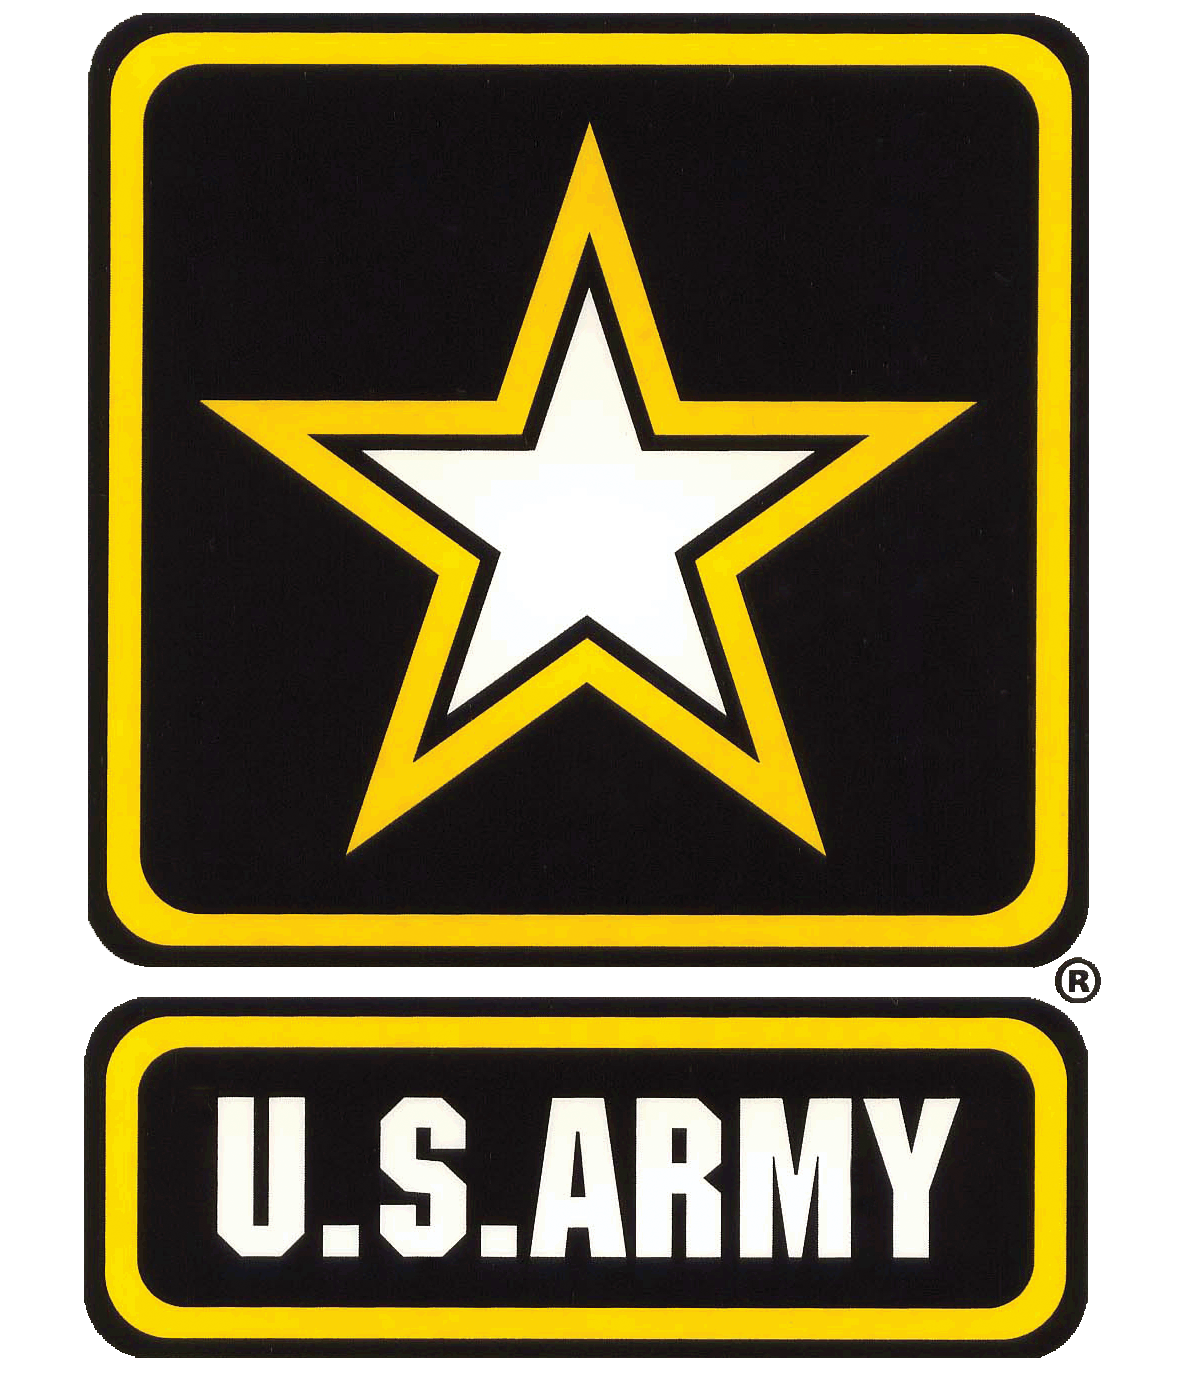 New Army Wallpaper, Army Picture